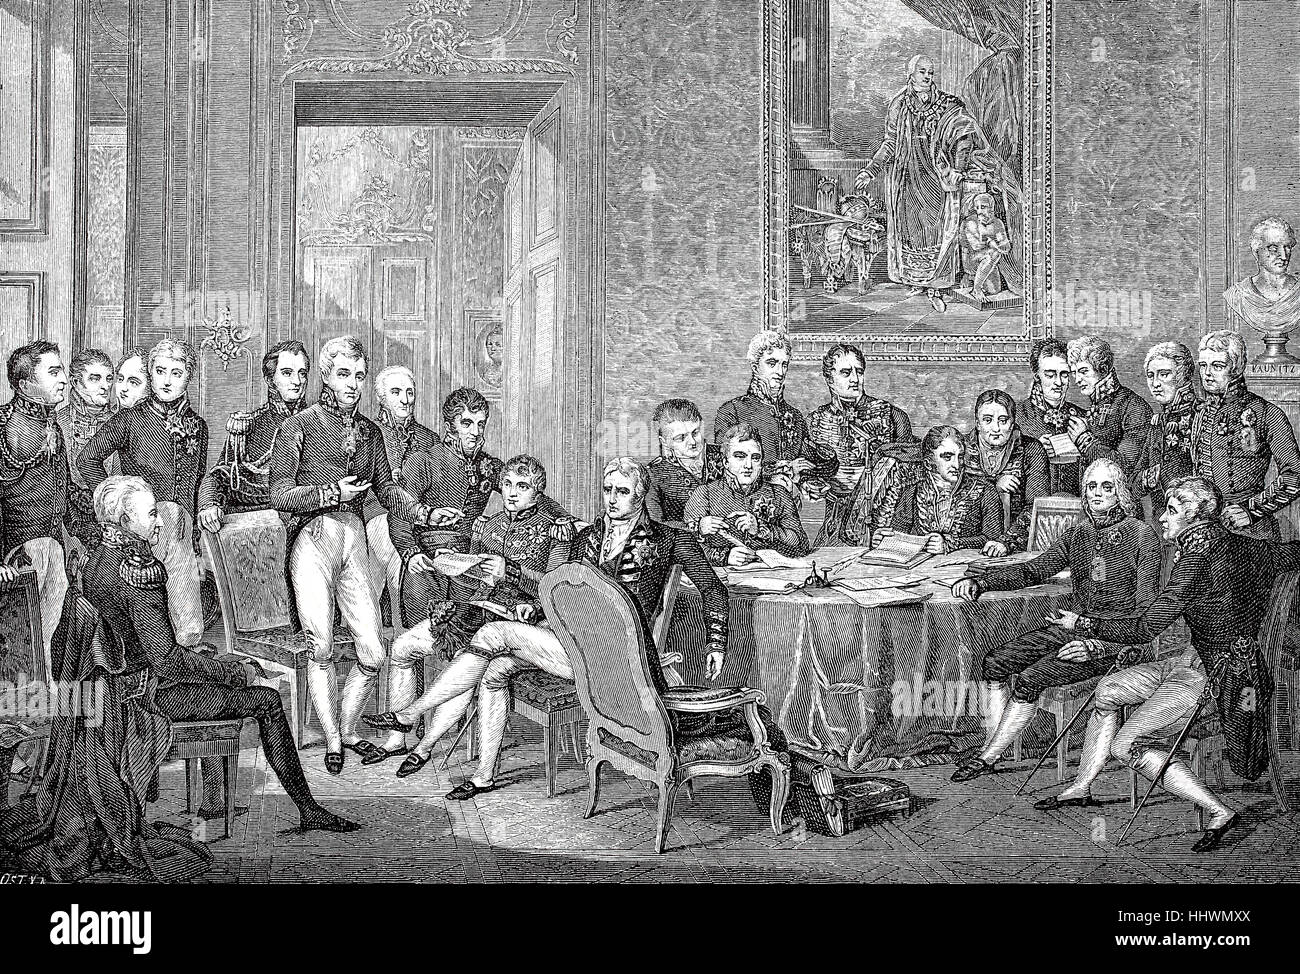 The Congress of Vienna 1815, German: Wiener Kongress, was a conference of ambassadors of European states,plenipotentiary of the eight treaties of Paris participating powers, paintings by Jean-Baptiste Isabey, Austria, historical image or illustration, published 1890, digital improved Stock Photo